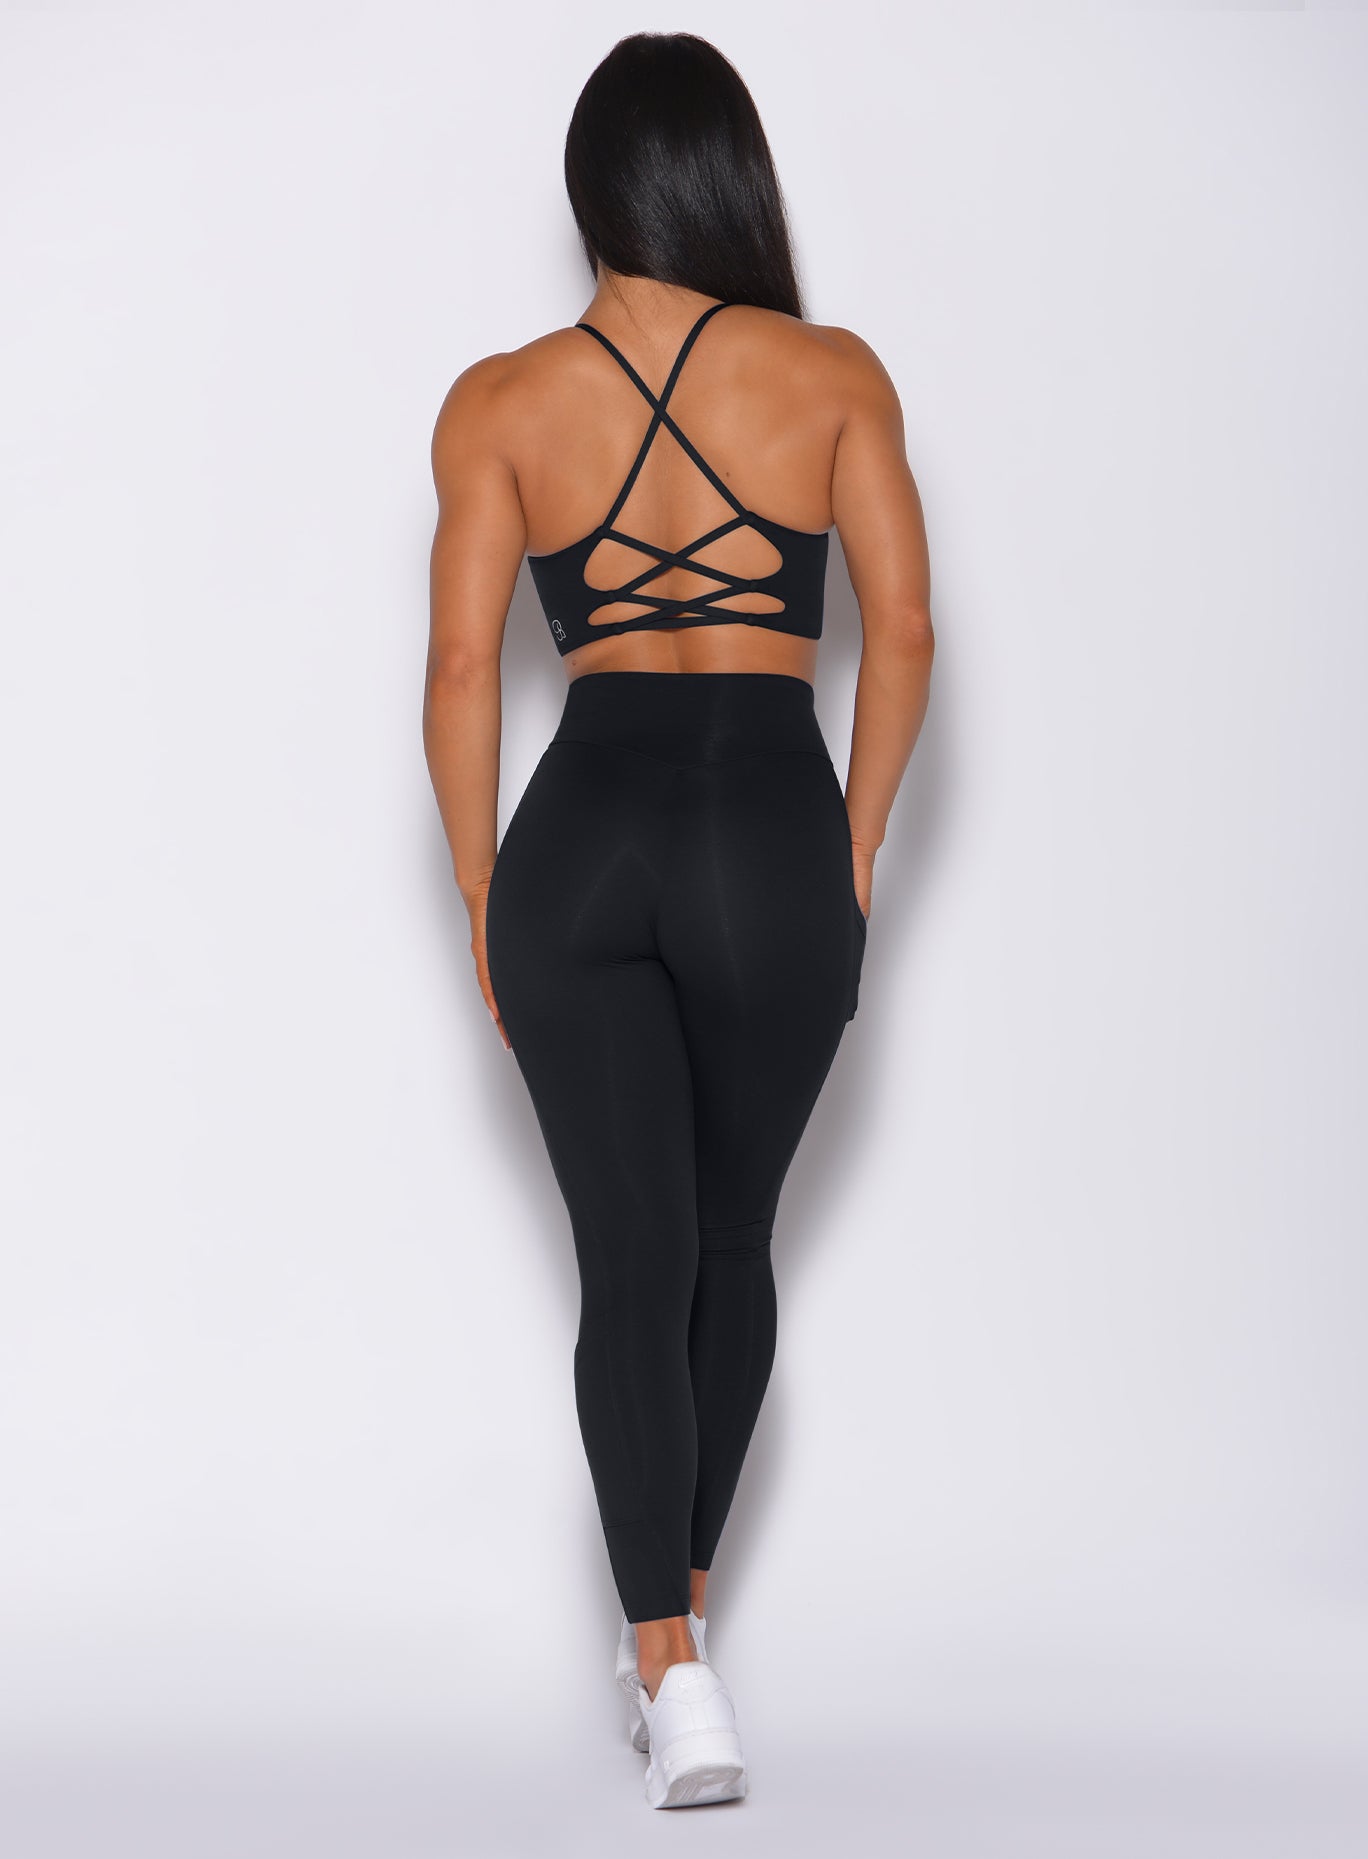 Back profile view of a model wearing our black empower leggings and a matching bra